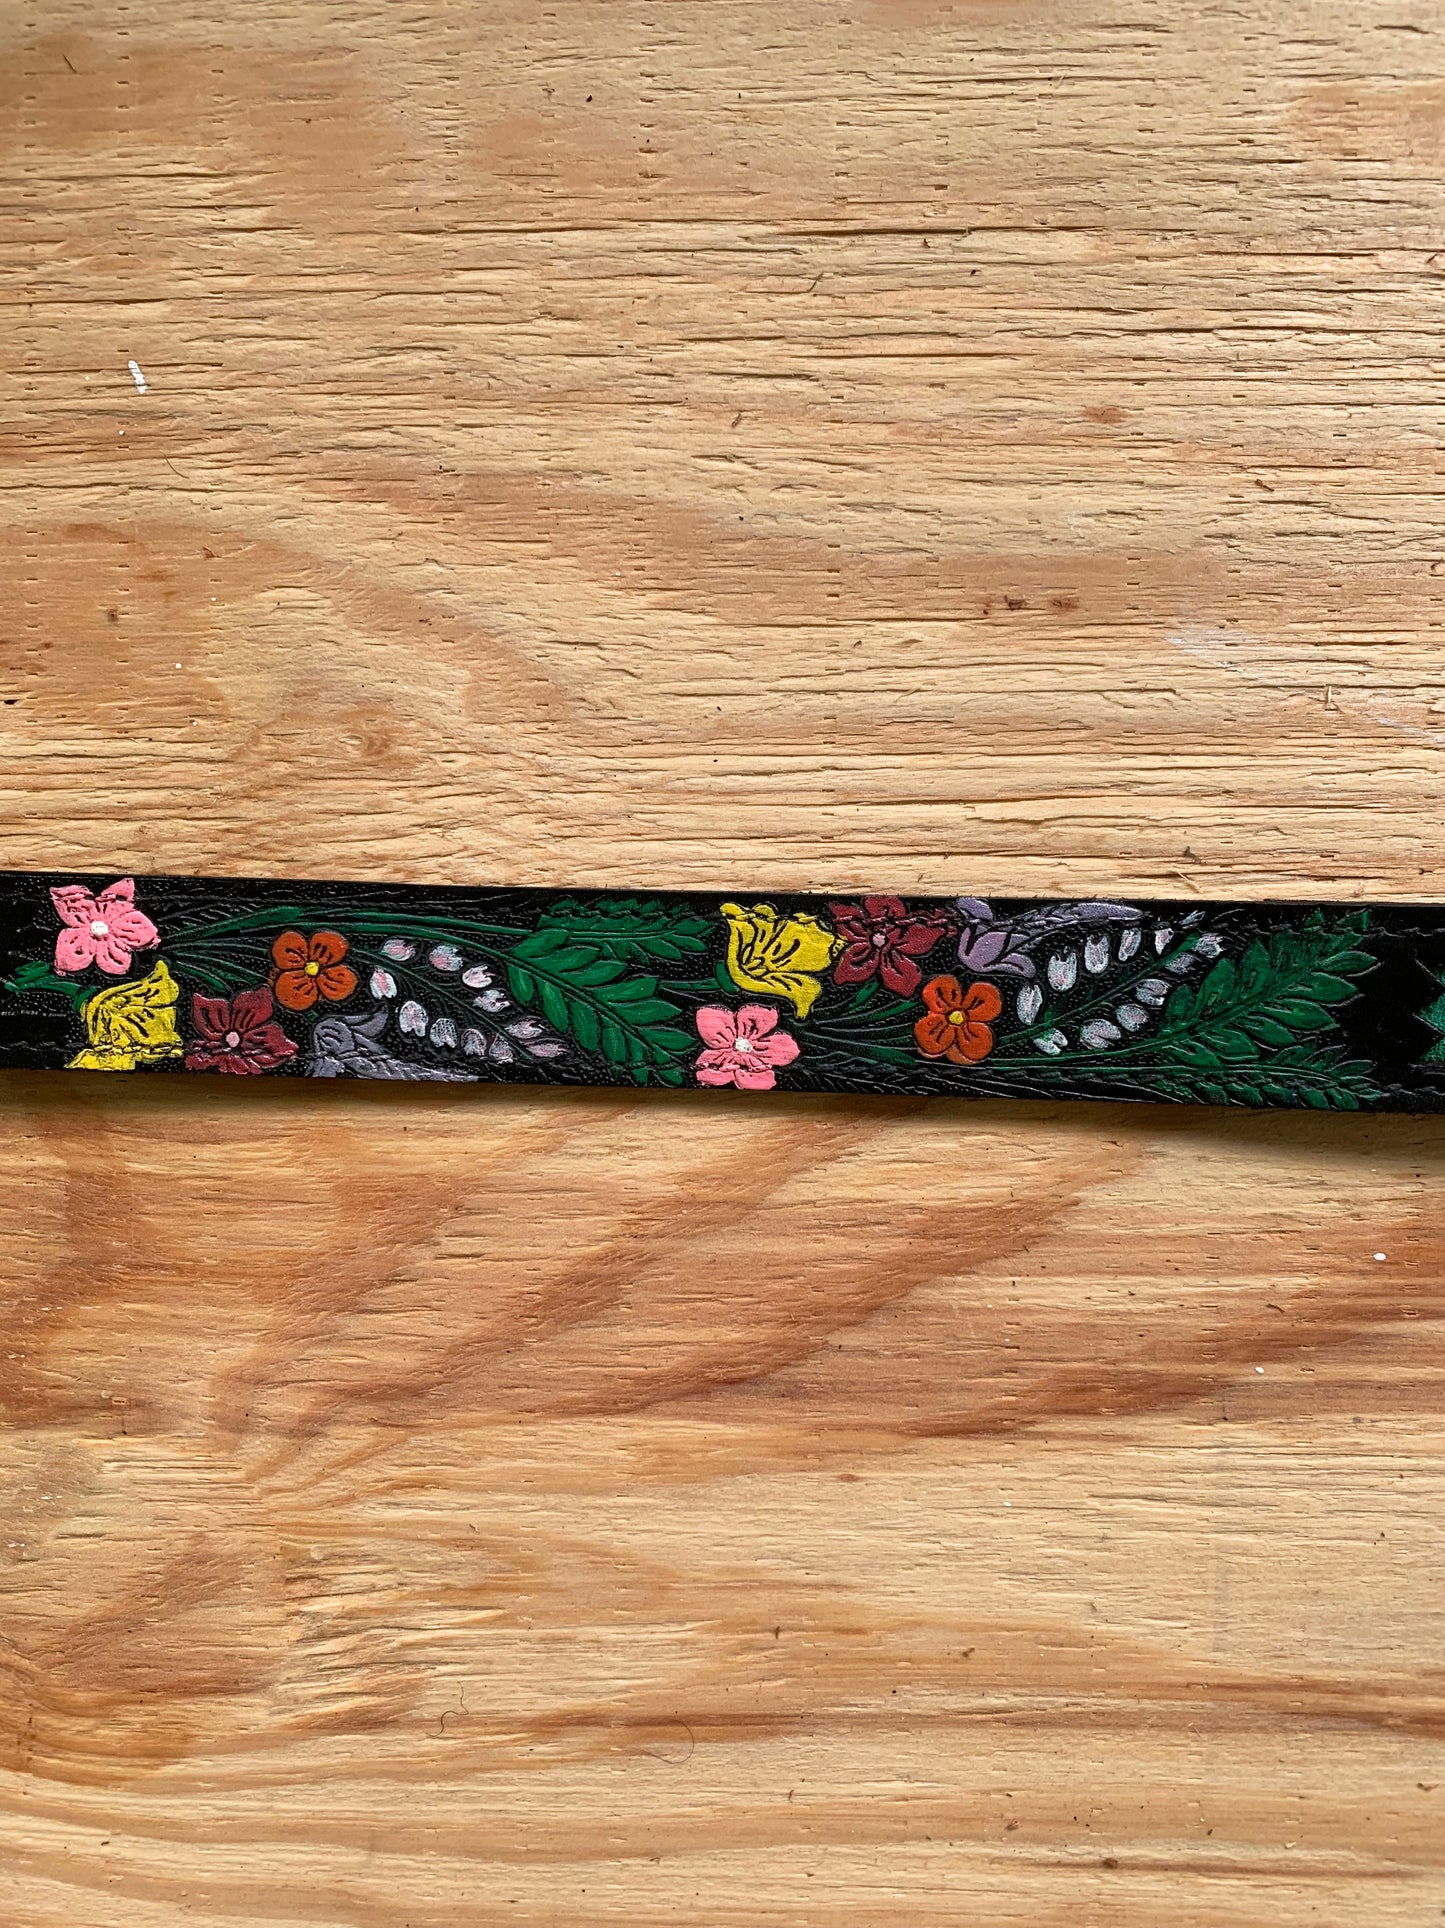 Bloom and Bling Cut-Out Leather Belt